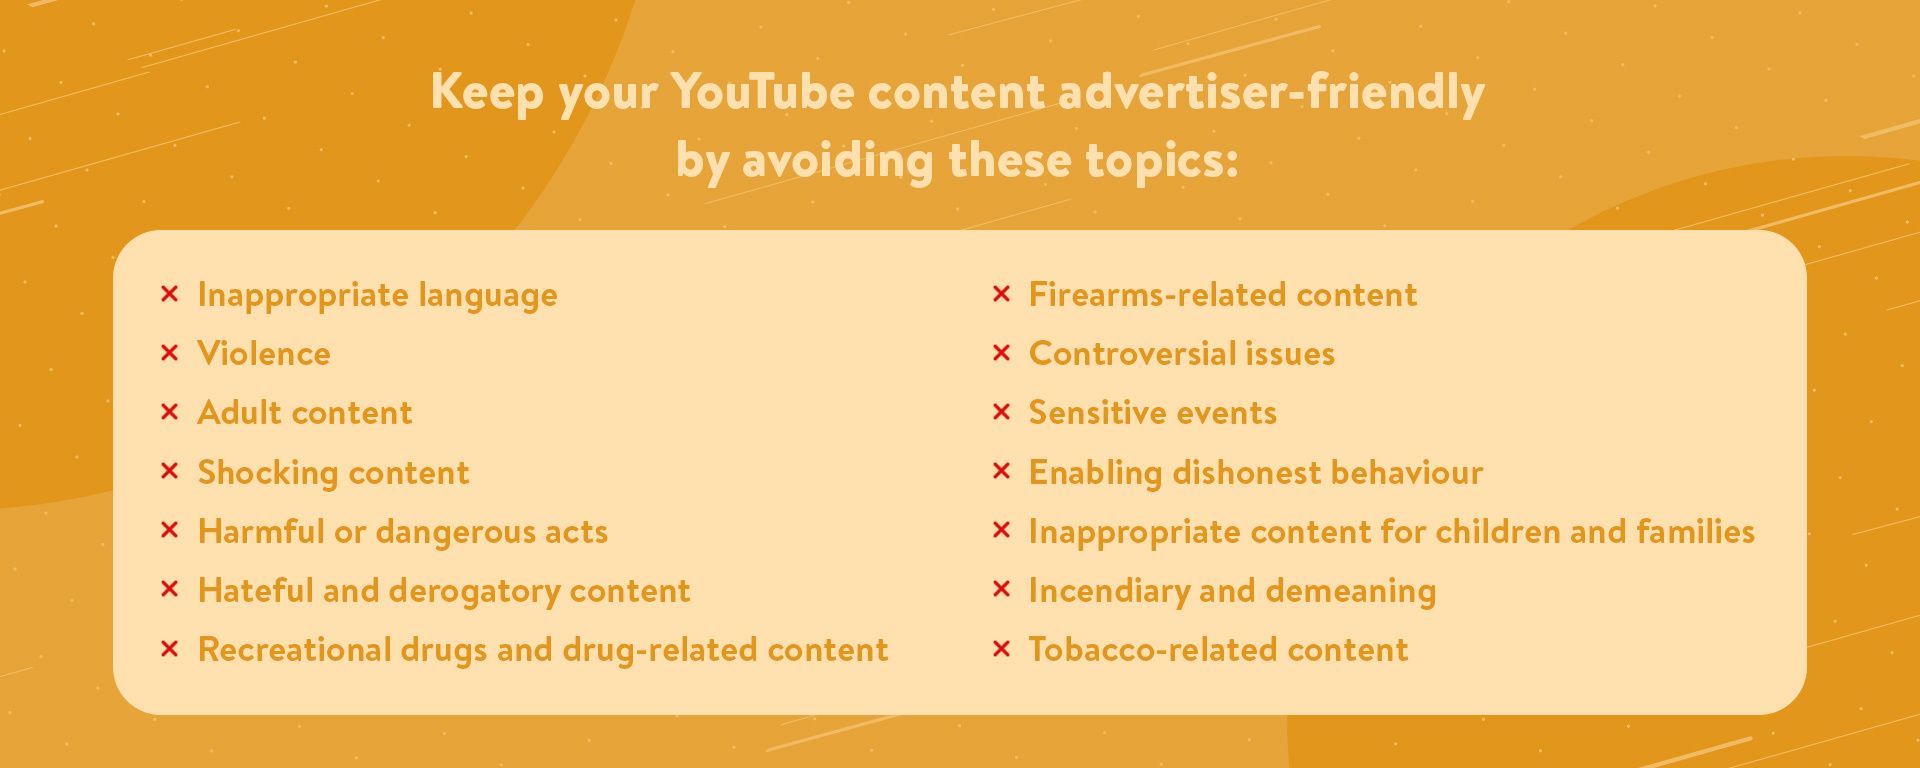 List of topics to avoid to keep YouTube content advertiser-friendly and avoid demonetization.